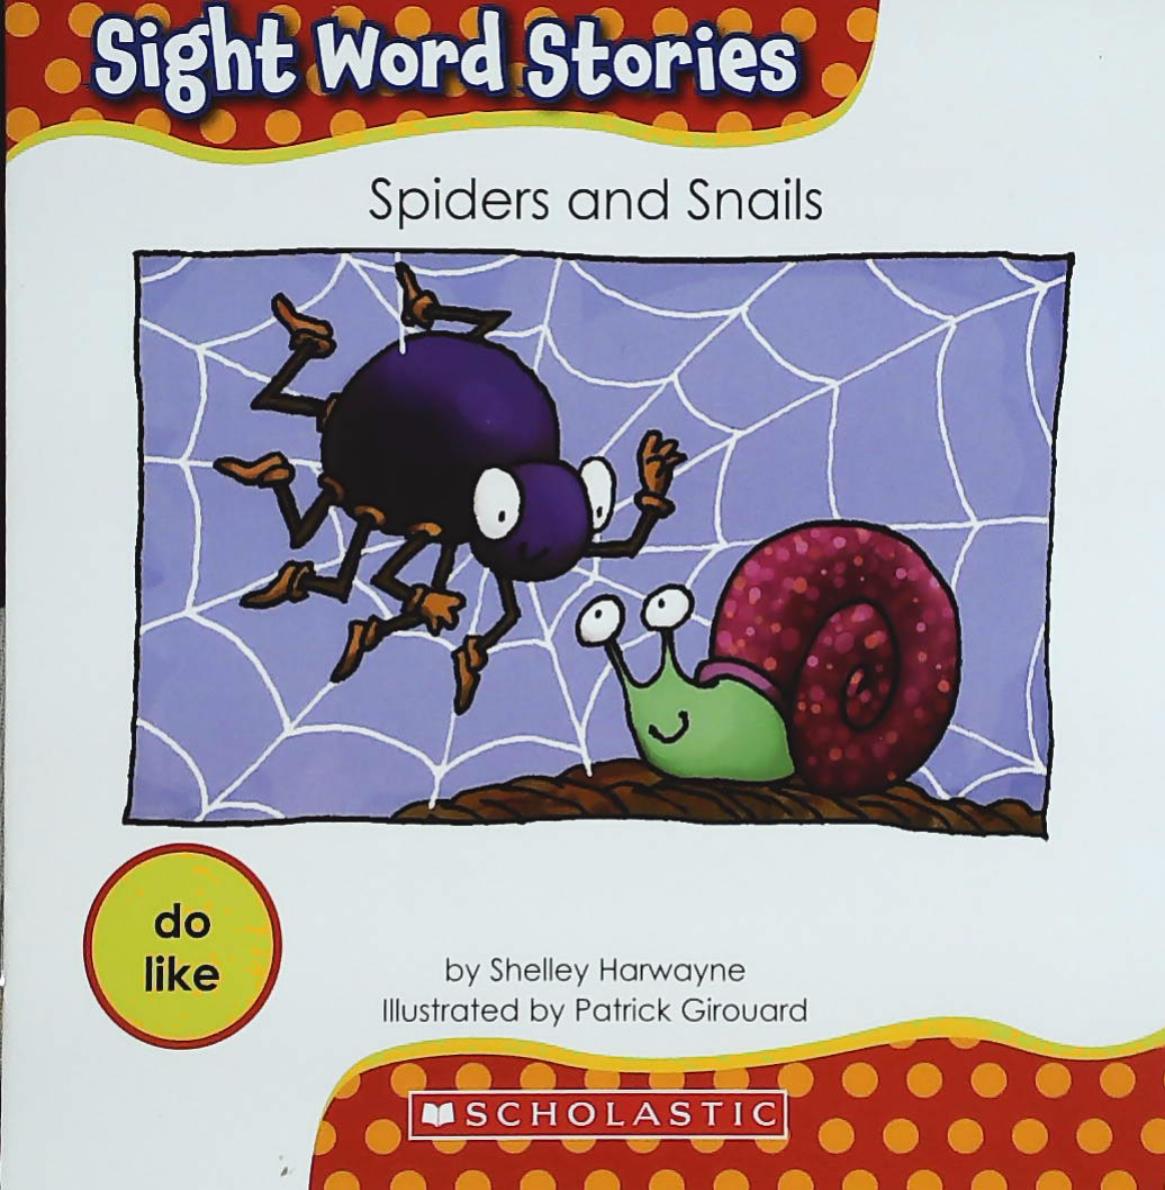 Livre ISBN 0545166322 Sight Word Stories : Spiders and Snails (Shelley Harwayne)